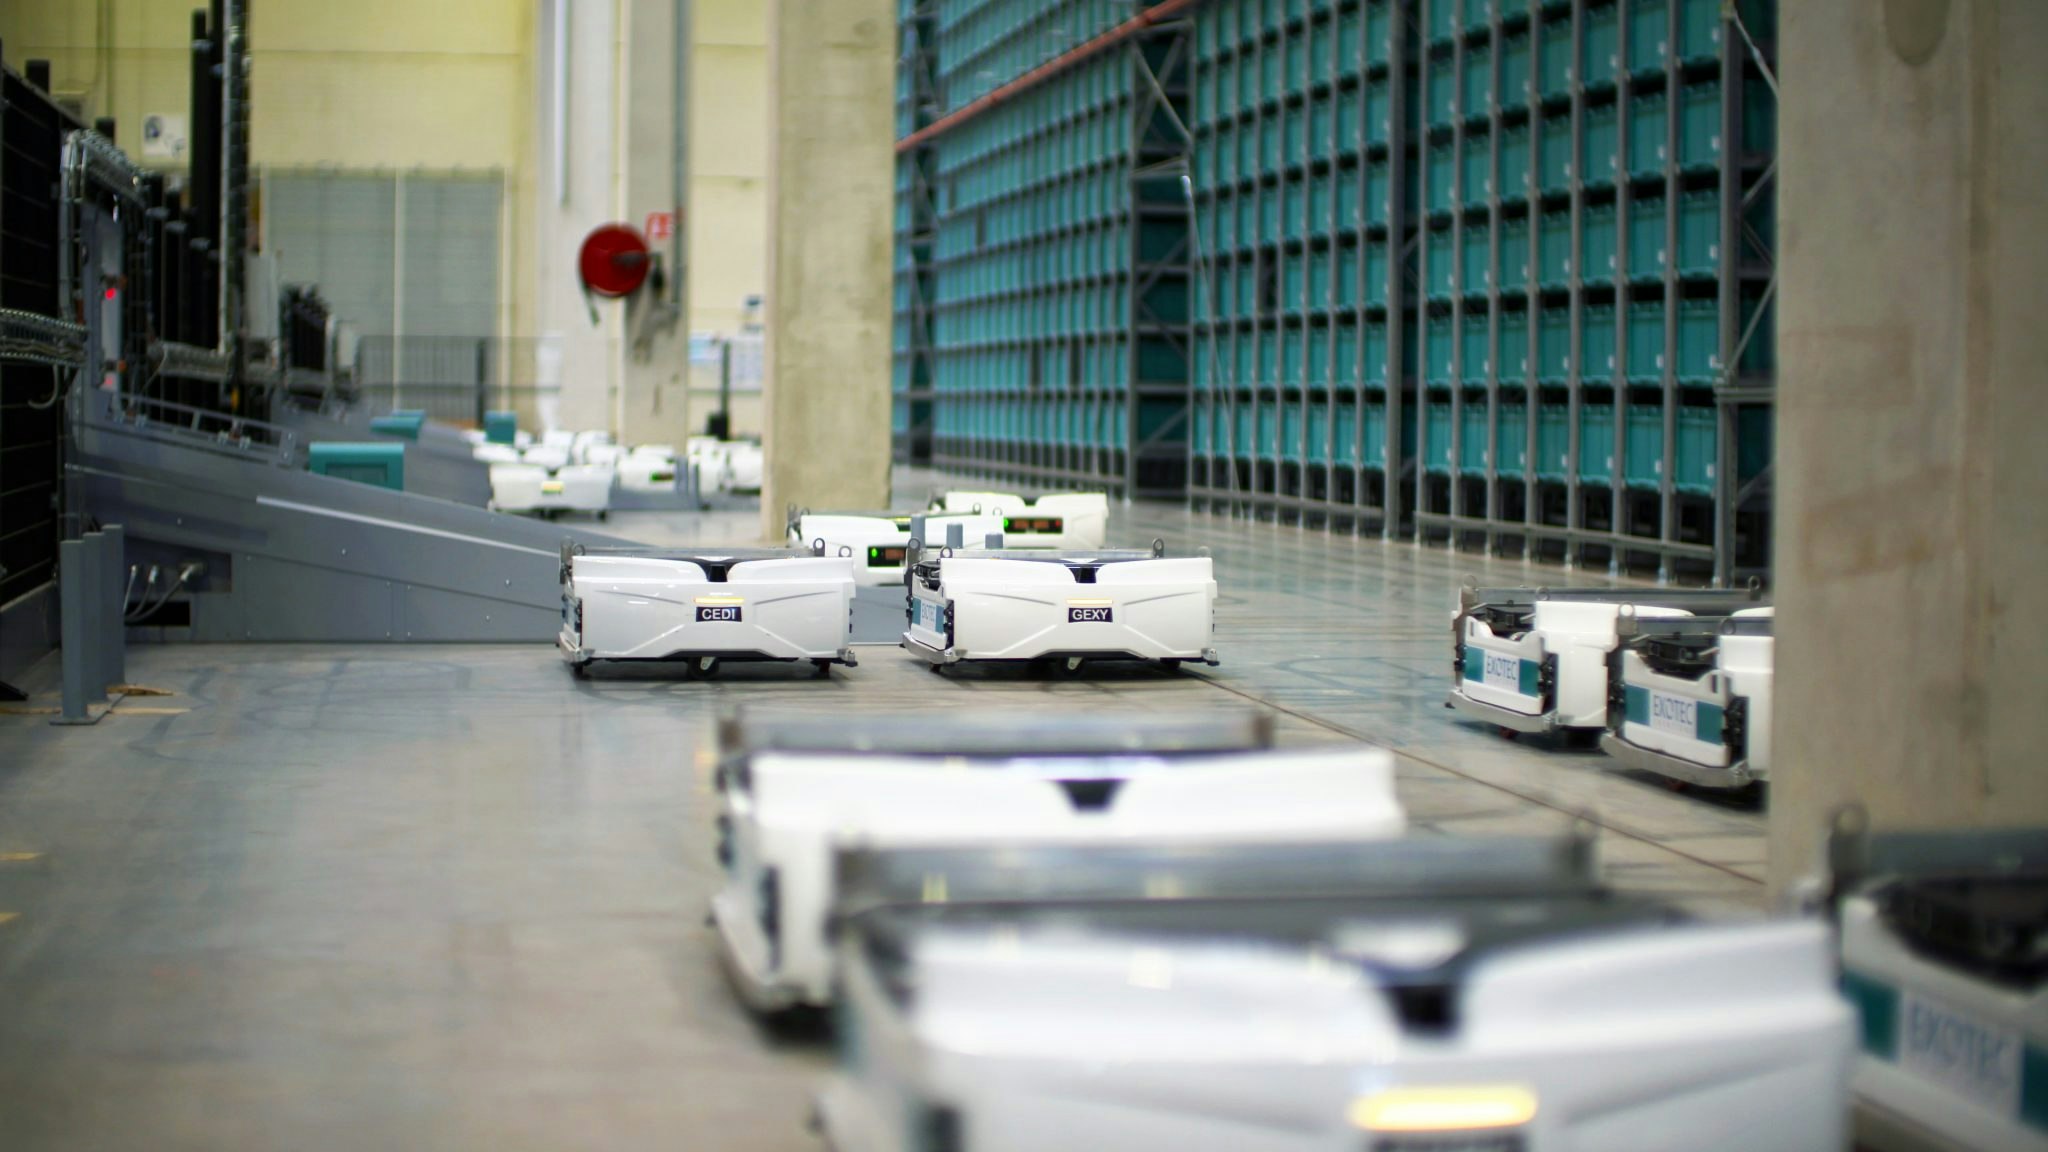 An image of Exotec Skypod robots, which are short and white with a wide square top, in a warehouse